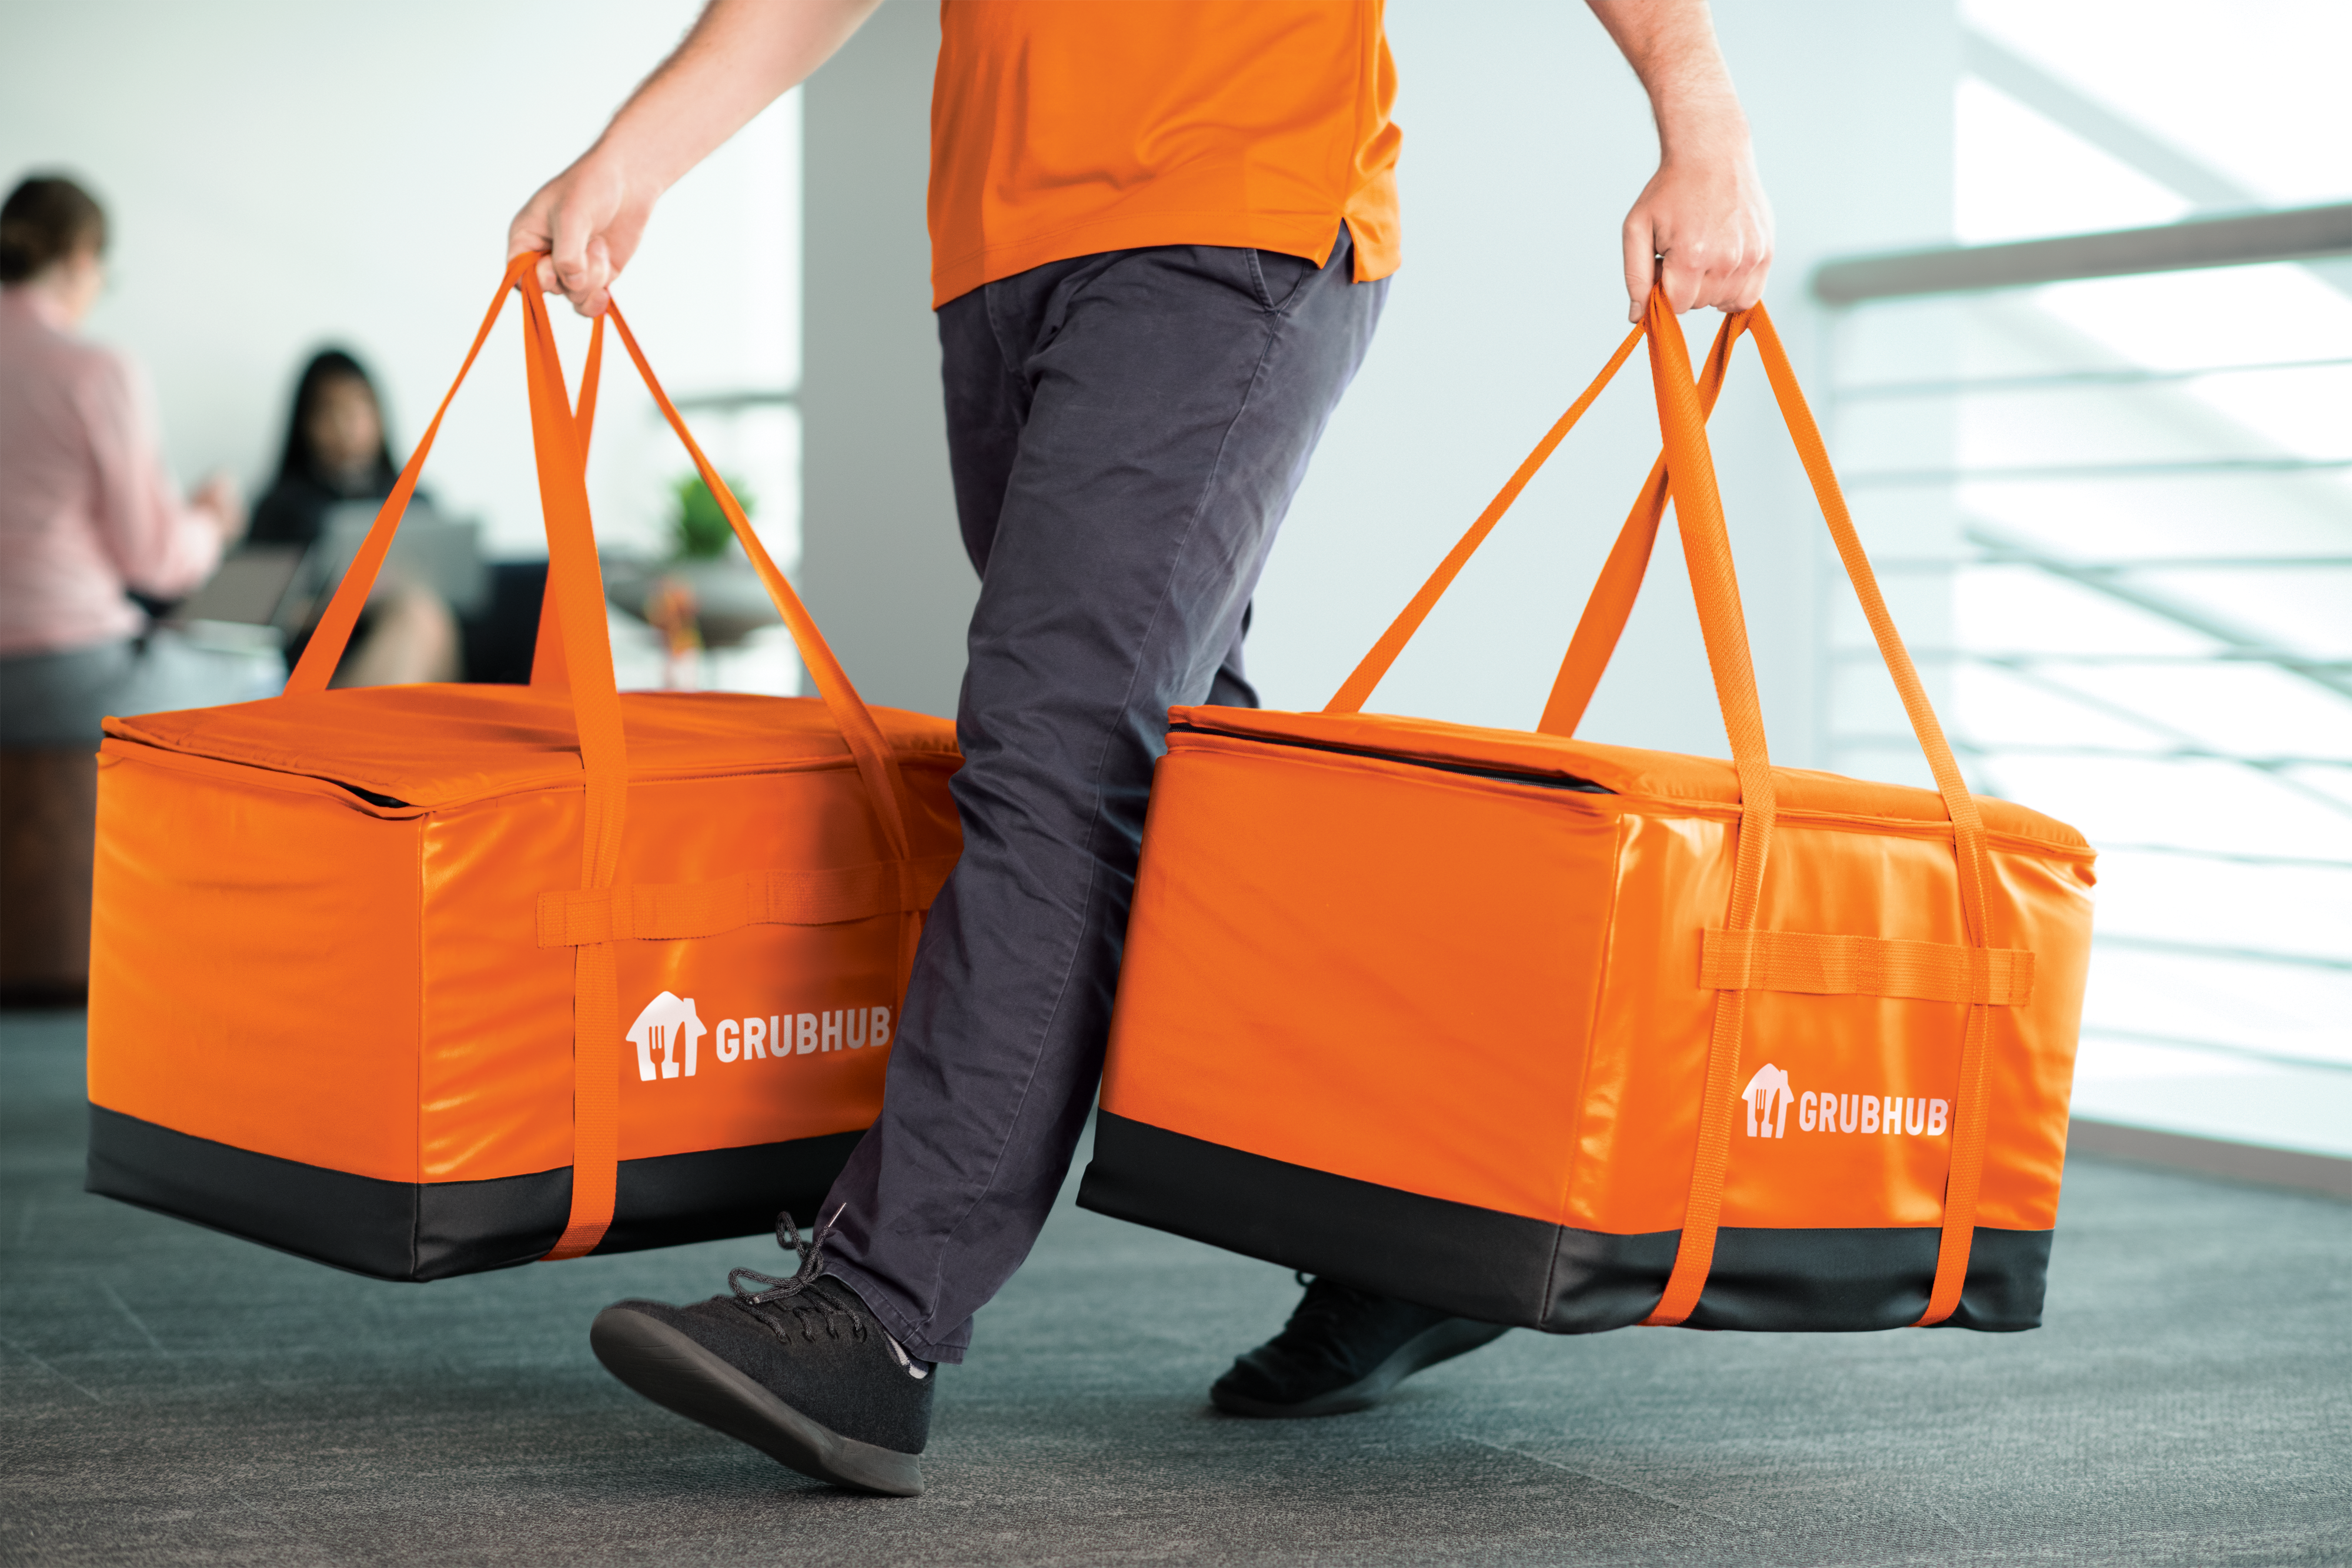 A person in dark jeans carrying two orange and insulated Grubhub delivery bags.